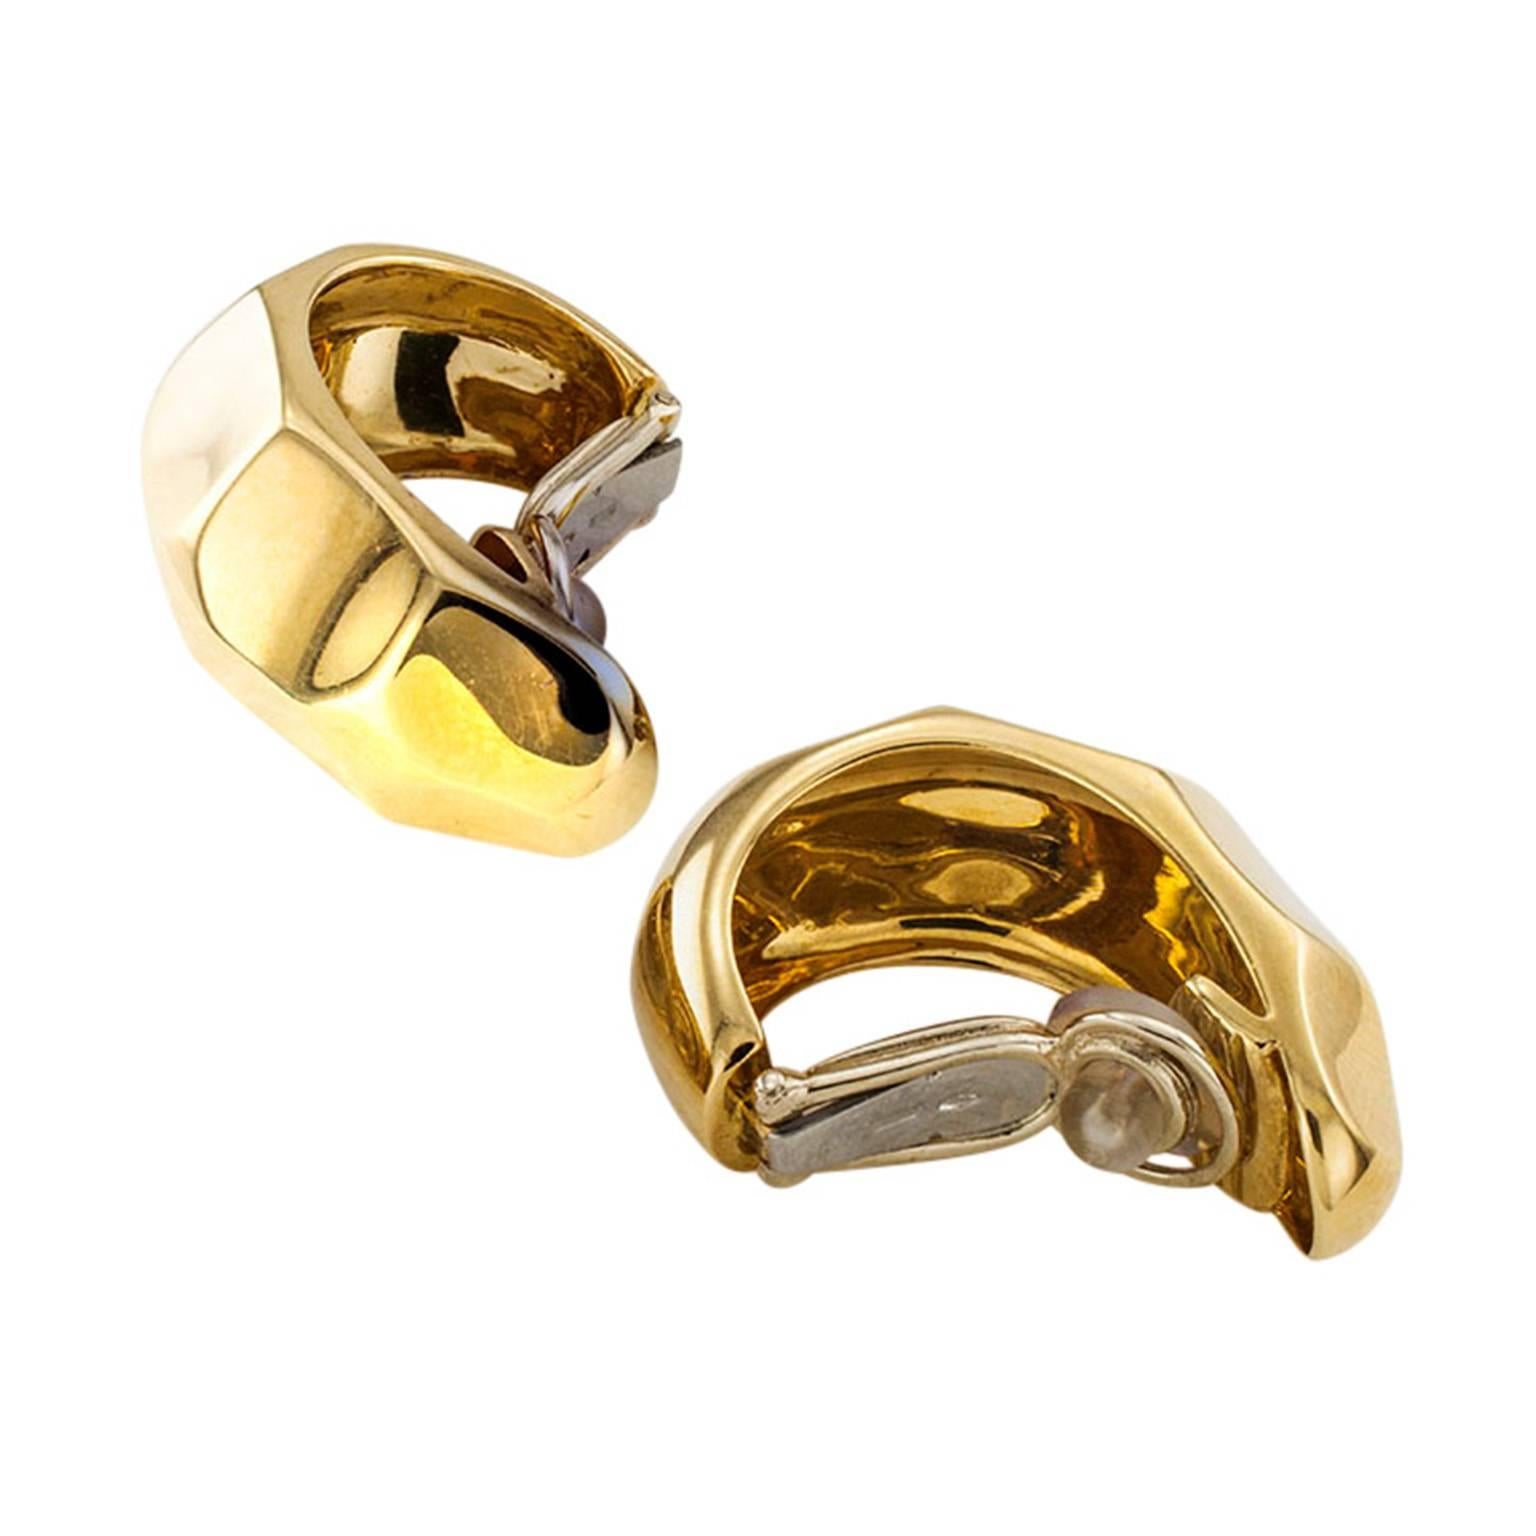 ILARIO Half Hoop 18 Karat Gold Ear Clips

The pinched pattern on these elegant and well proportioned 18 karat gold hoops elevates them to a level all their own...  so distinctive and chic, like the woman who wears them.  Made by ILARIO in Italy,